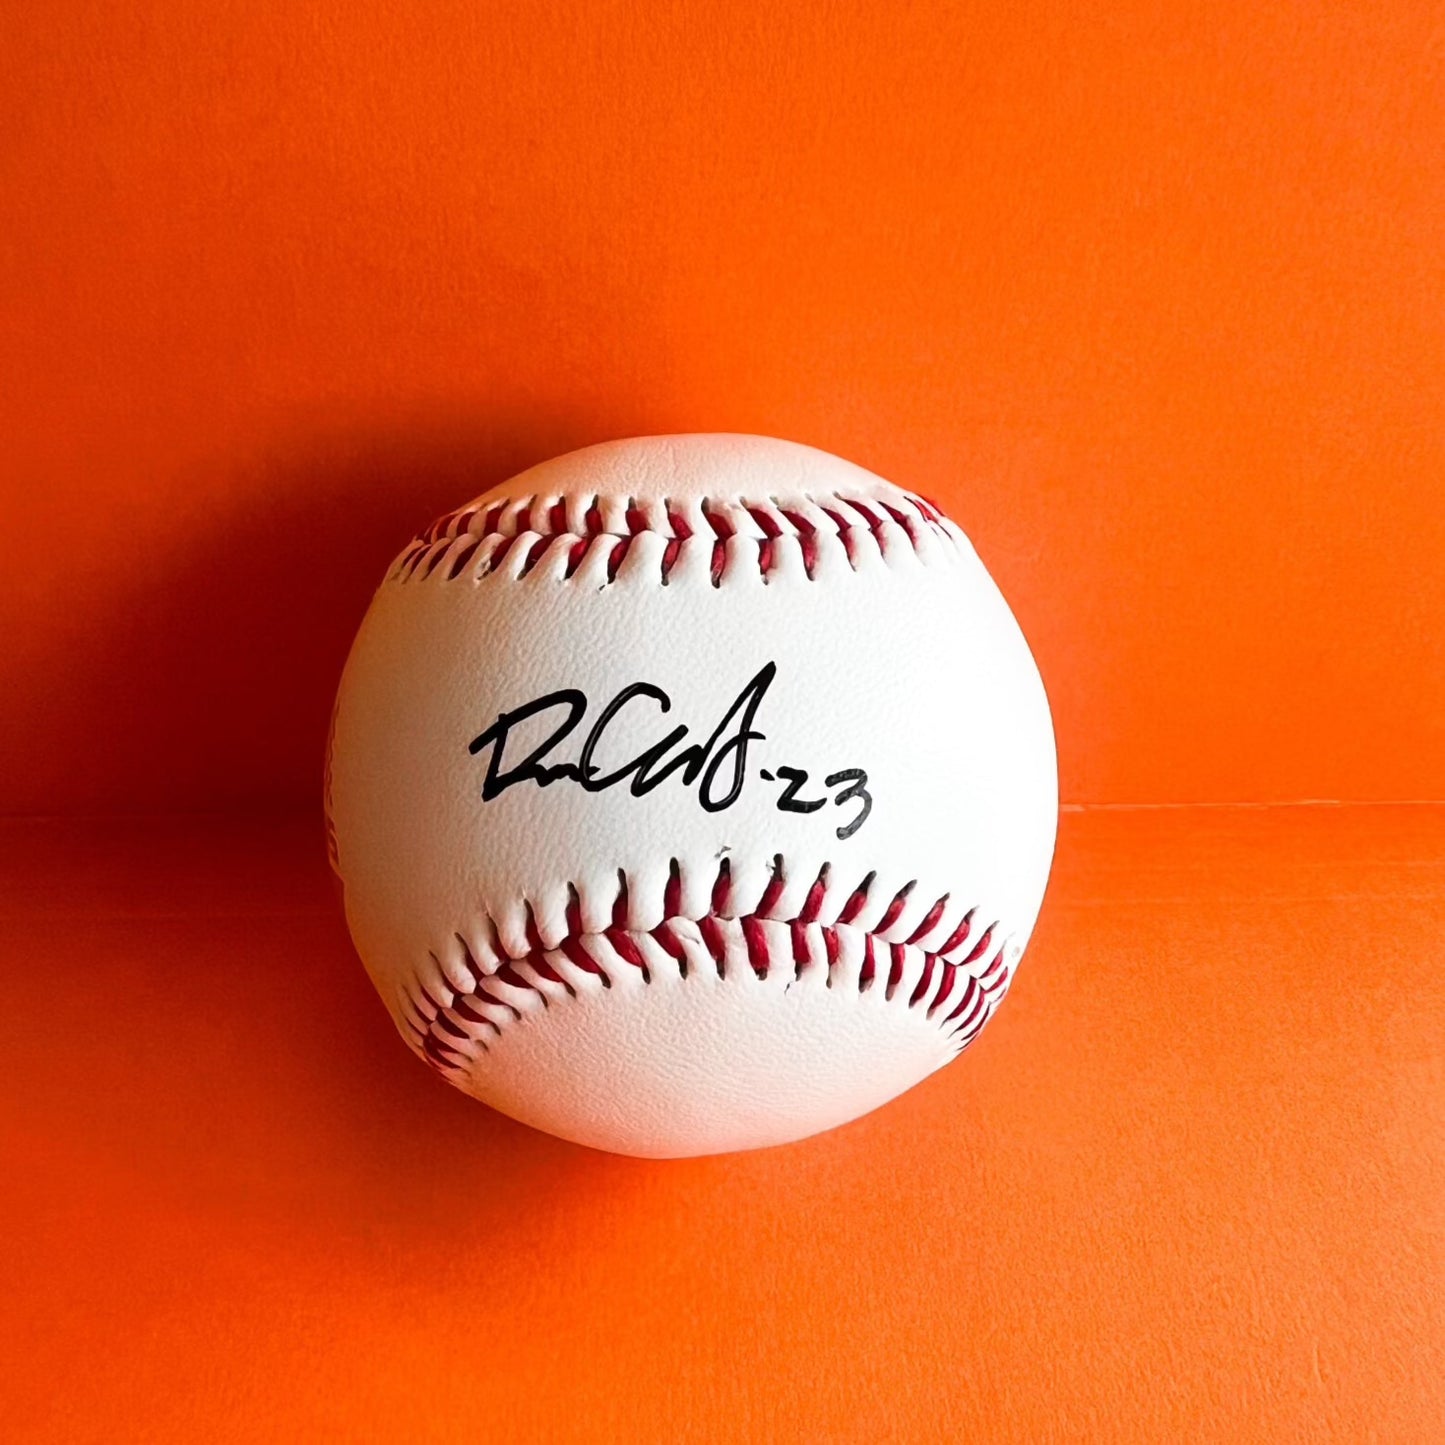 Dean Curley Autographed National Championship Baseball